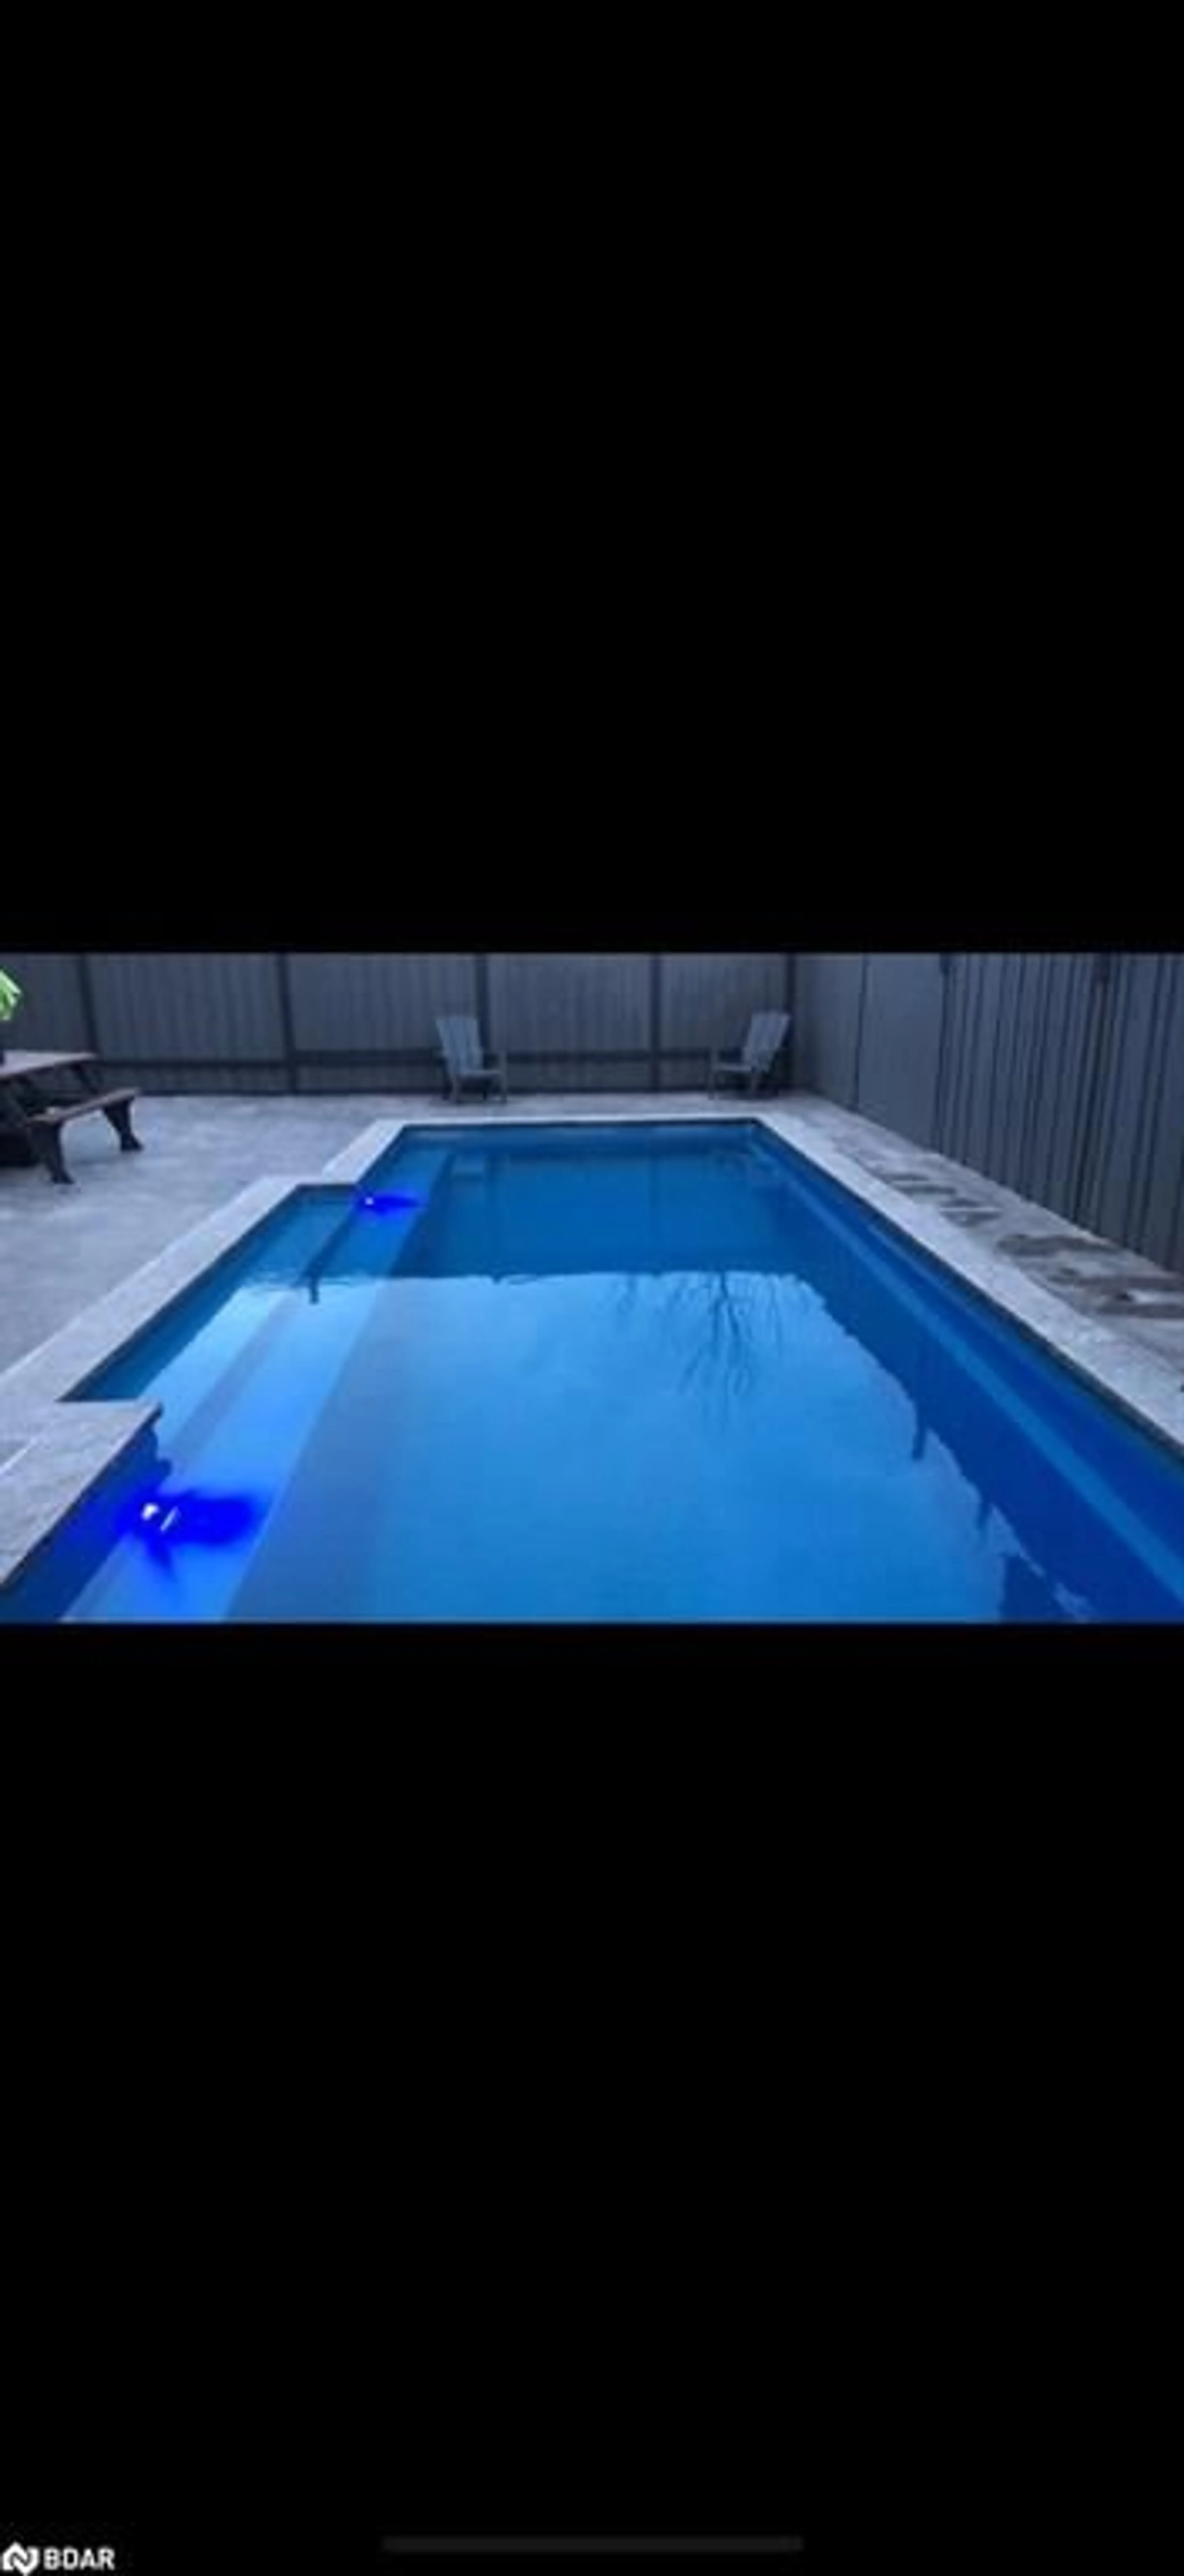 Indoor or outdoor pool for 267 Johnson St, Barrie Ontario L4M 6R9